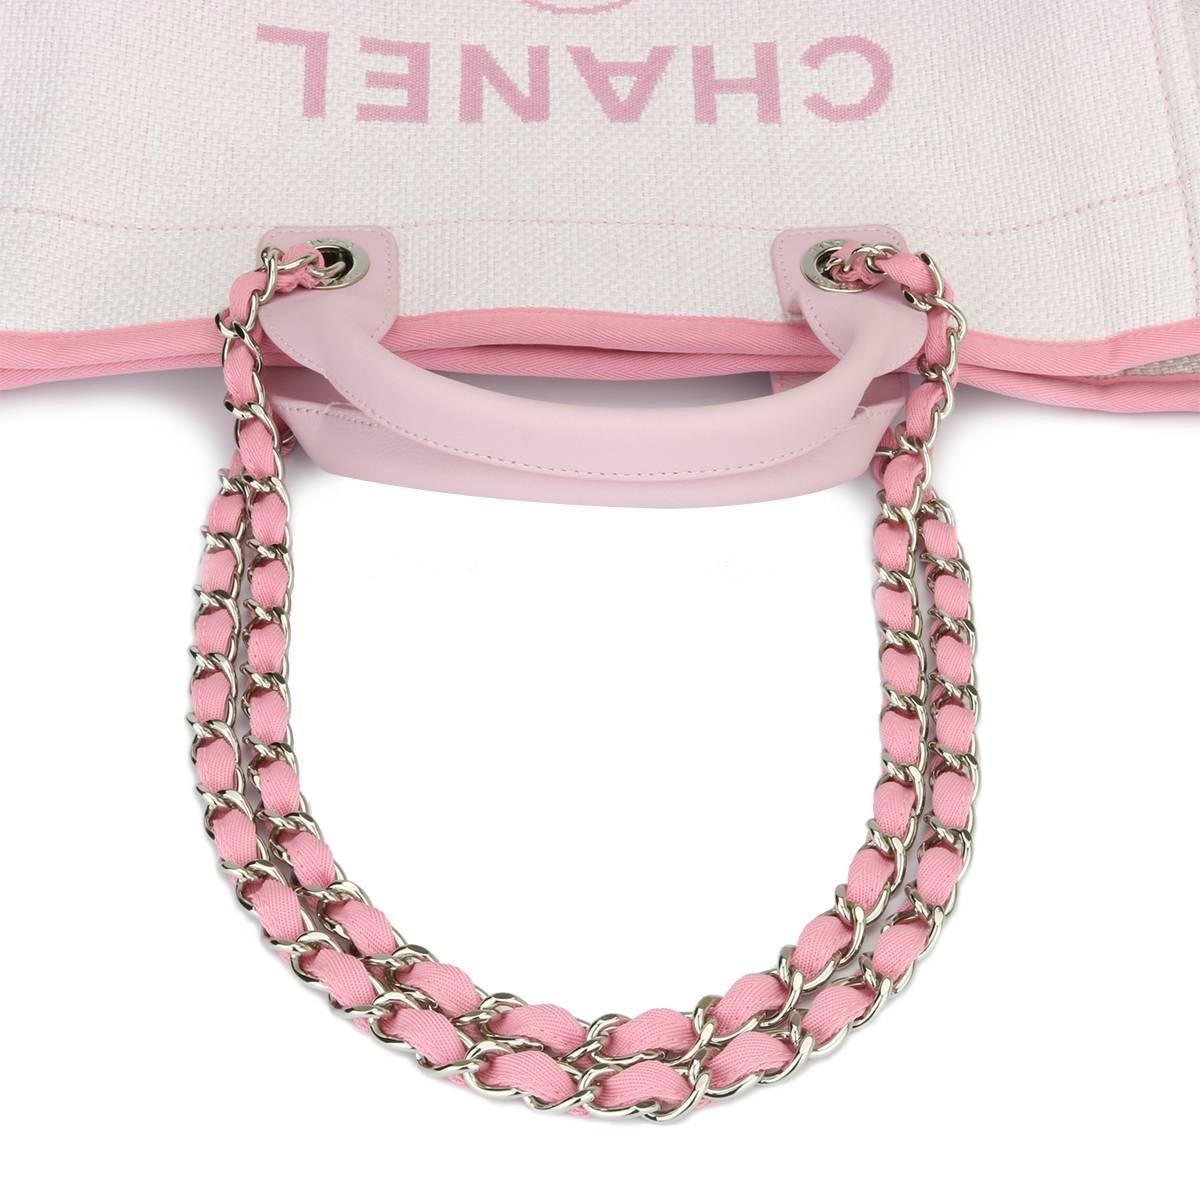 Women's or Men's CHANEL Deauville Tote Large Pink Canvas with Silver Hardware 2016